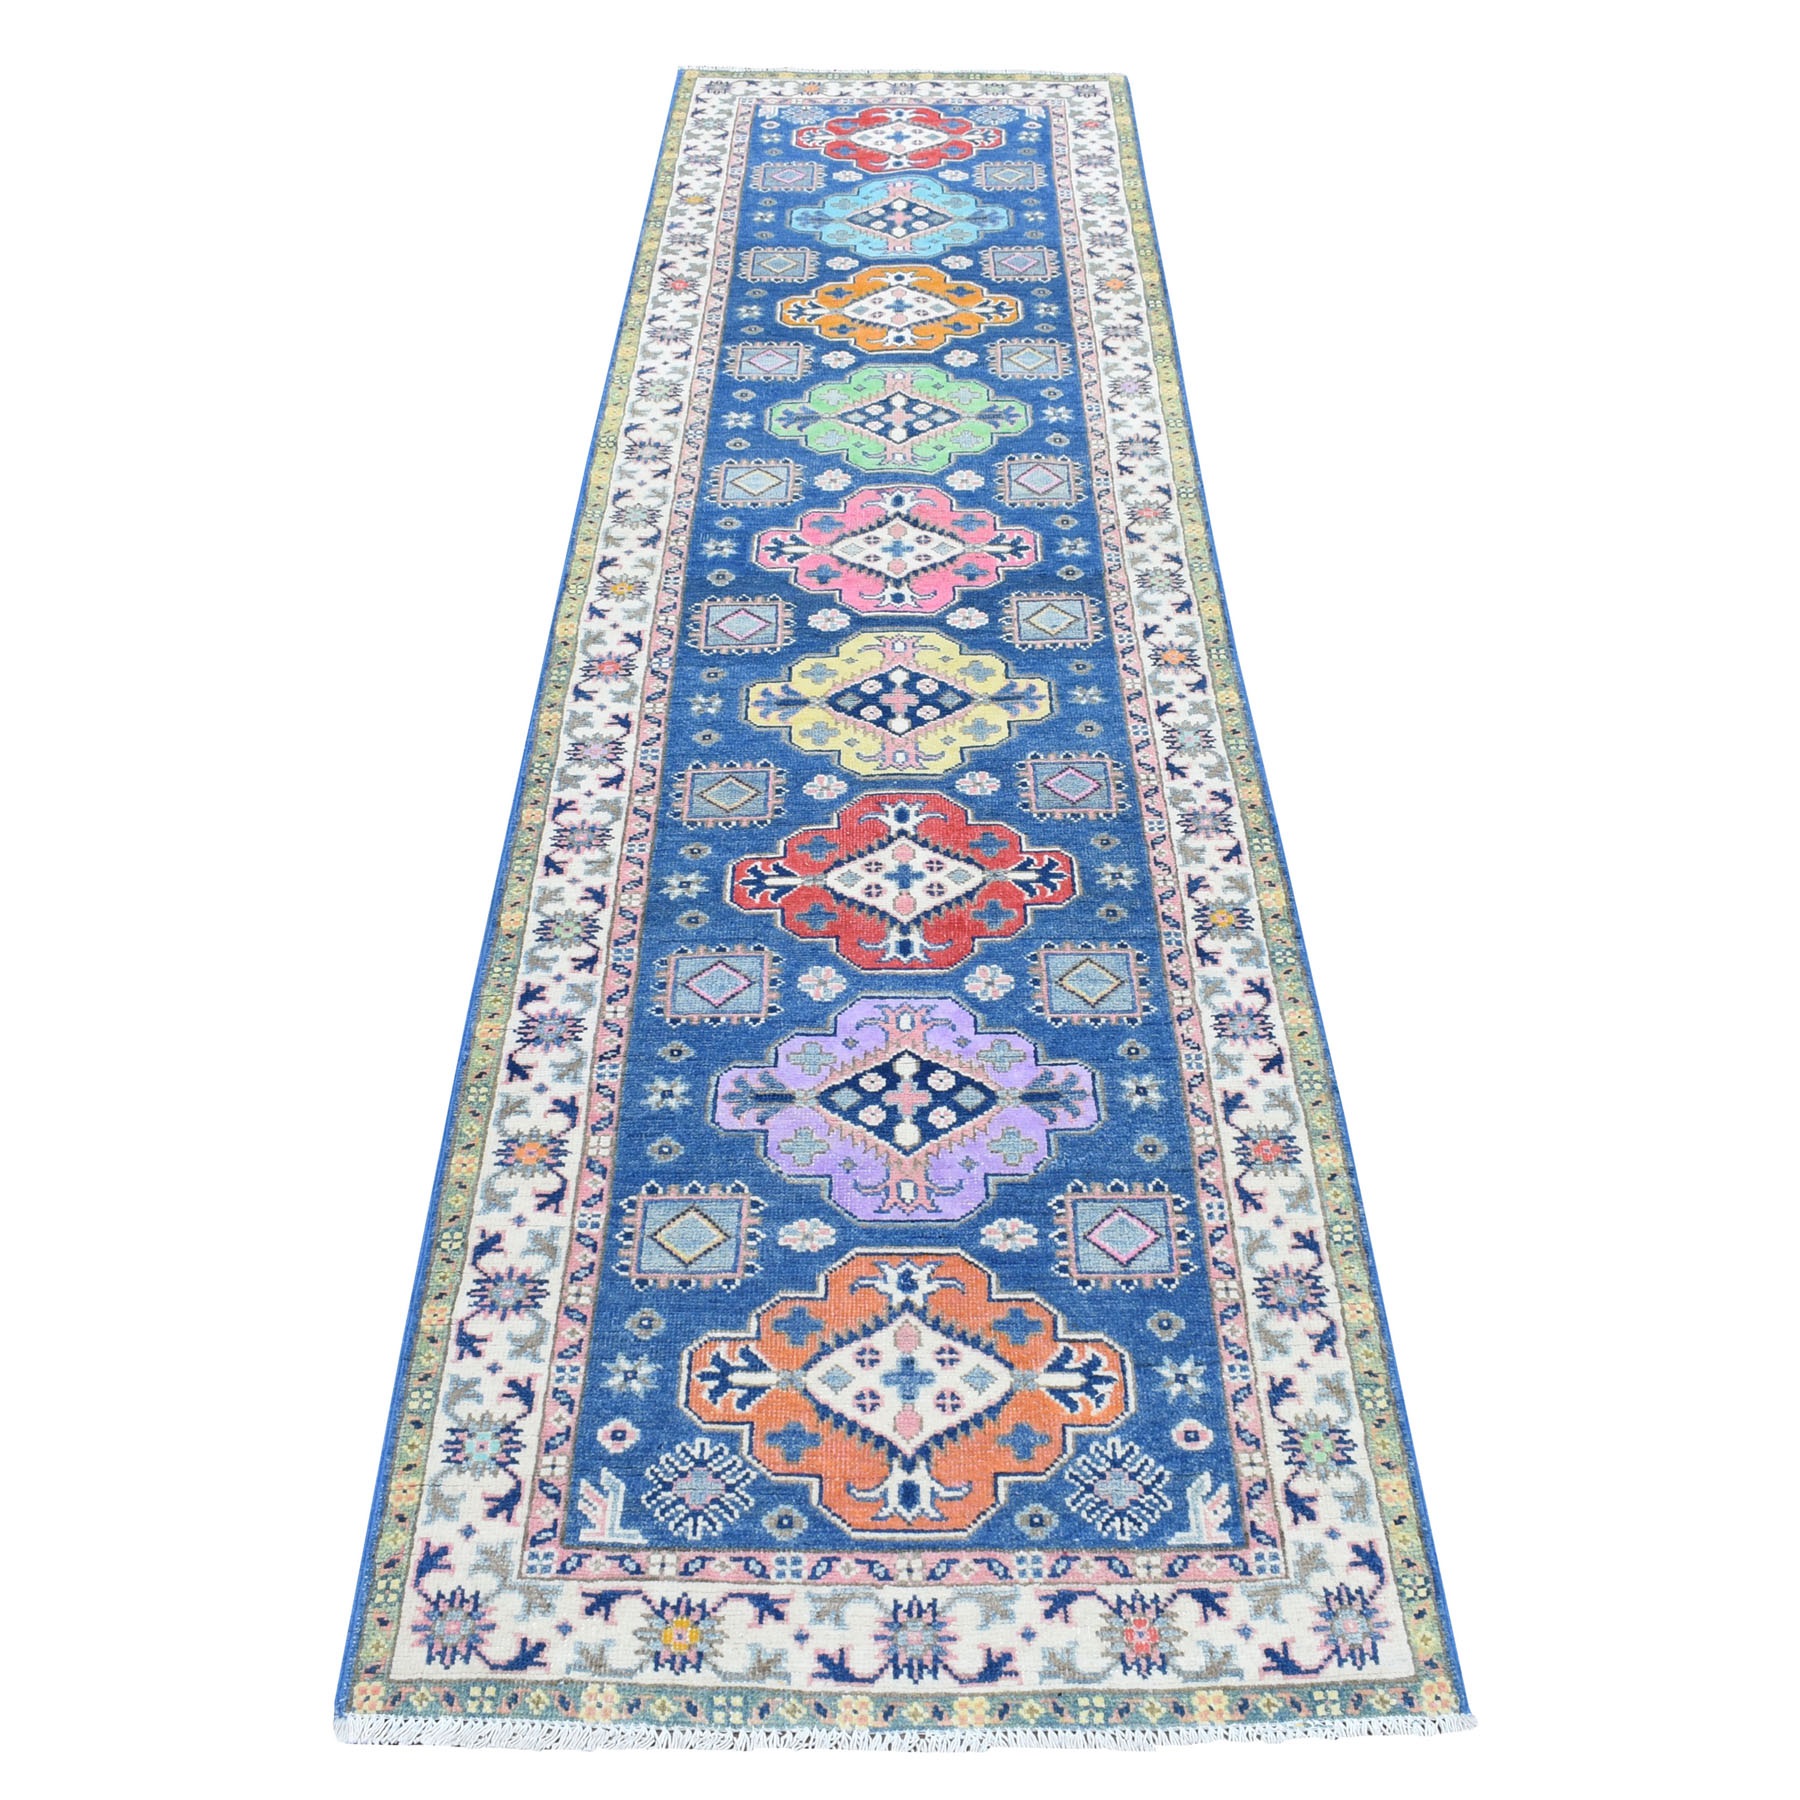 2'7"X10'1" Colorful Blue Fusion Kazak Pure Wool Hand Knotted Runner Oriental Rug moaedc0a